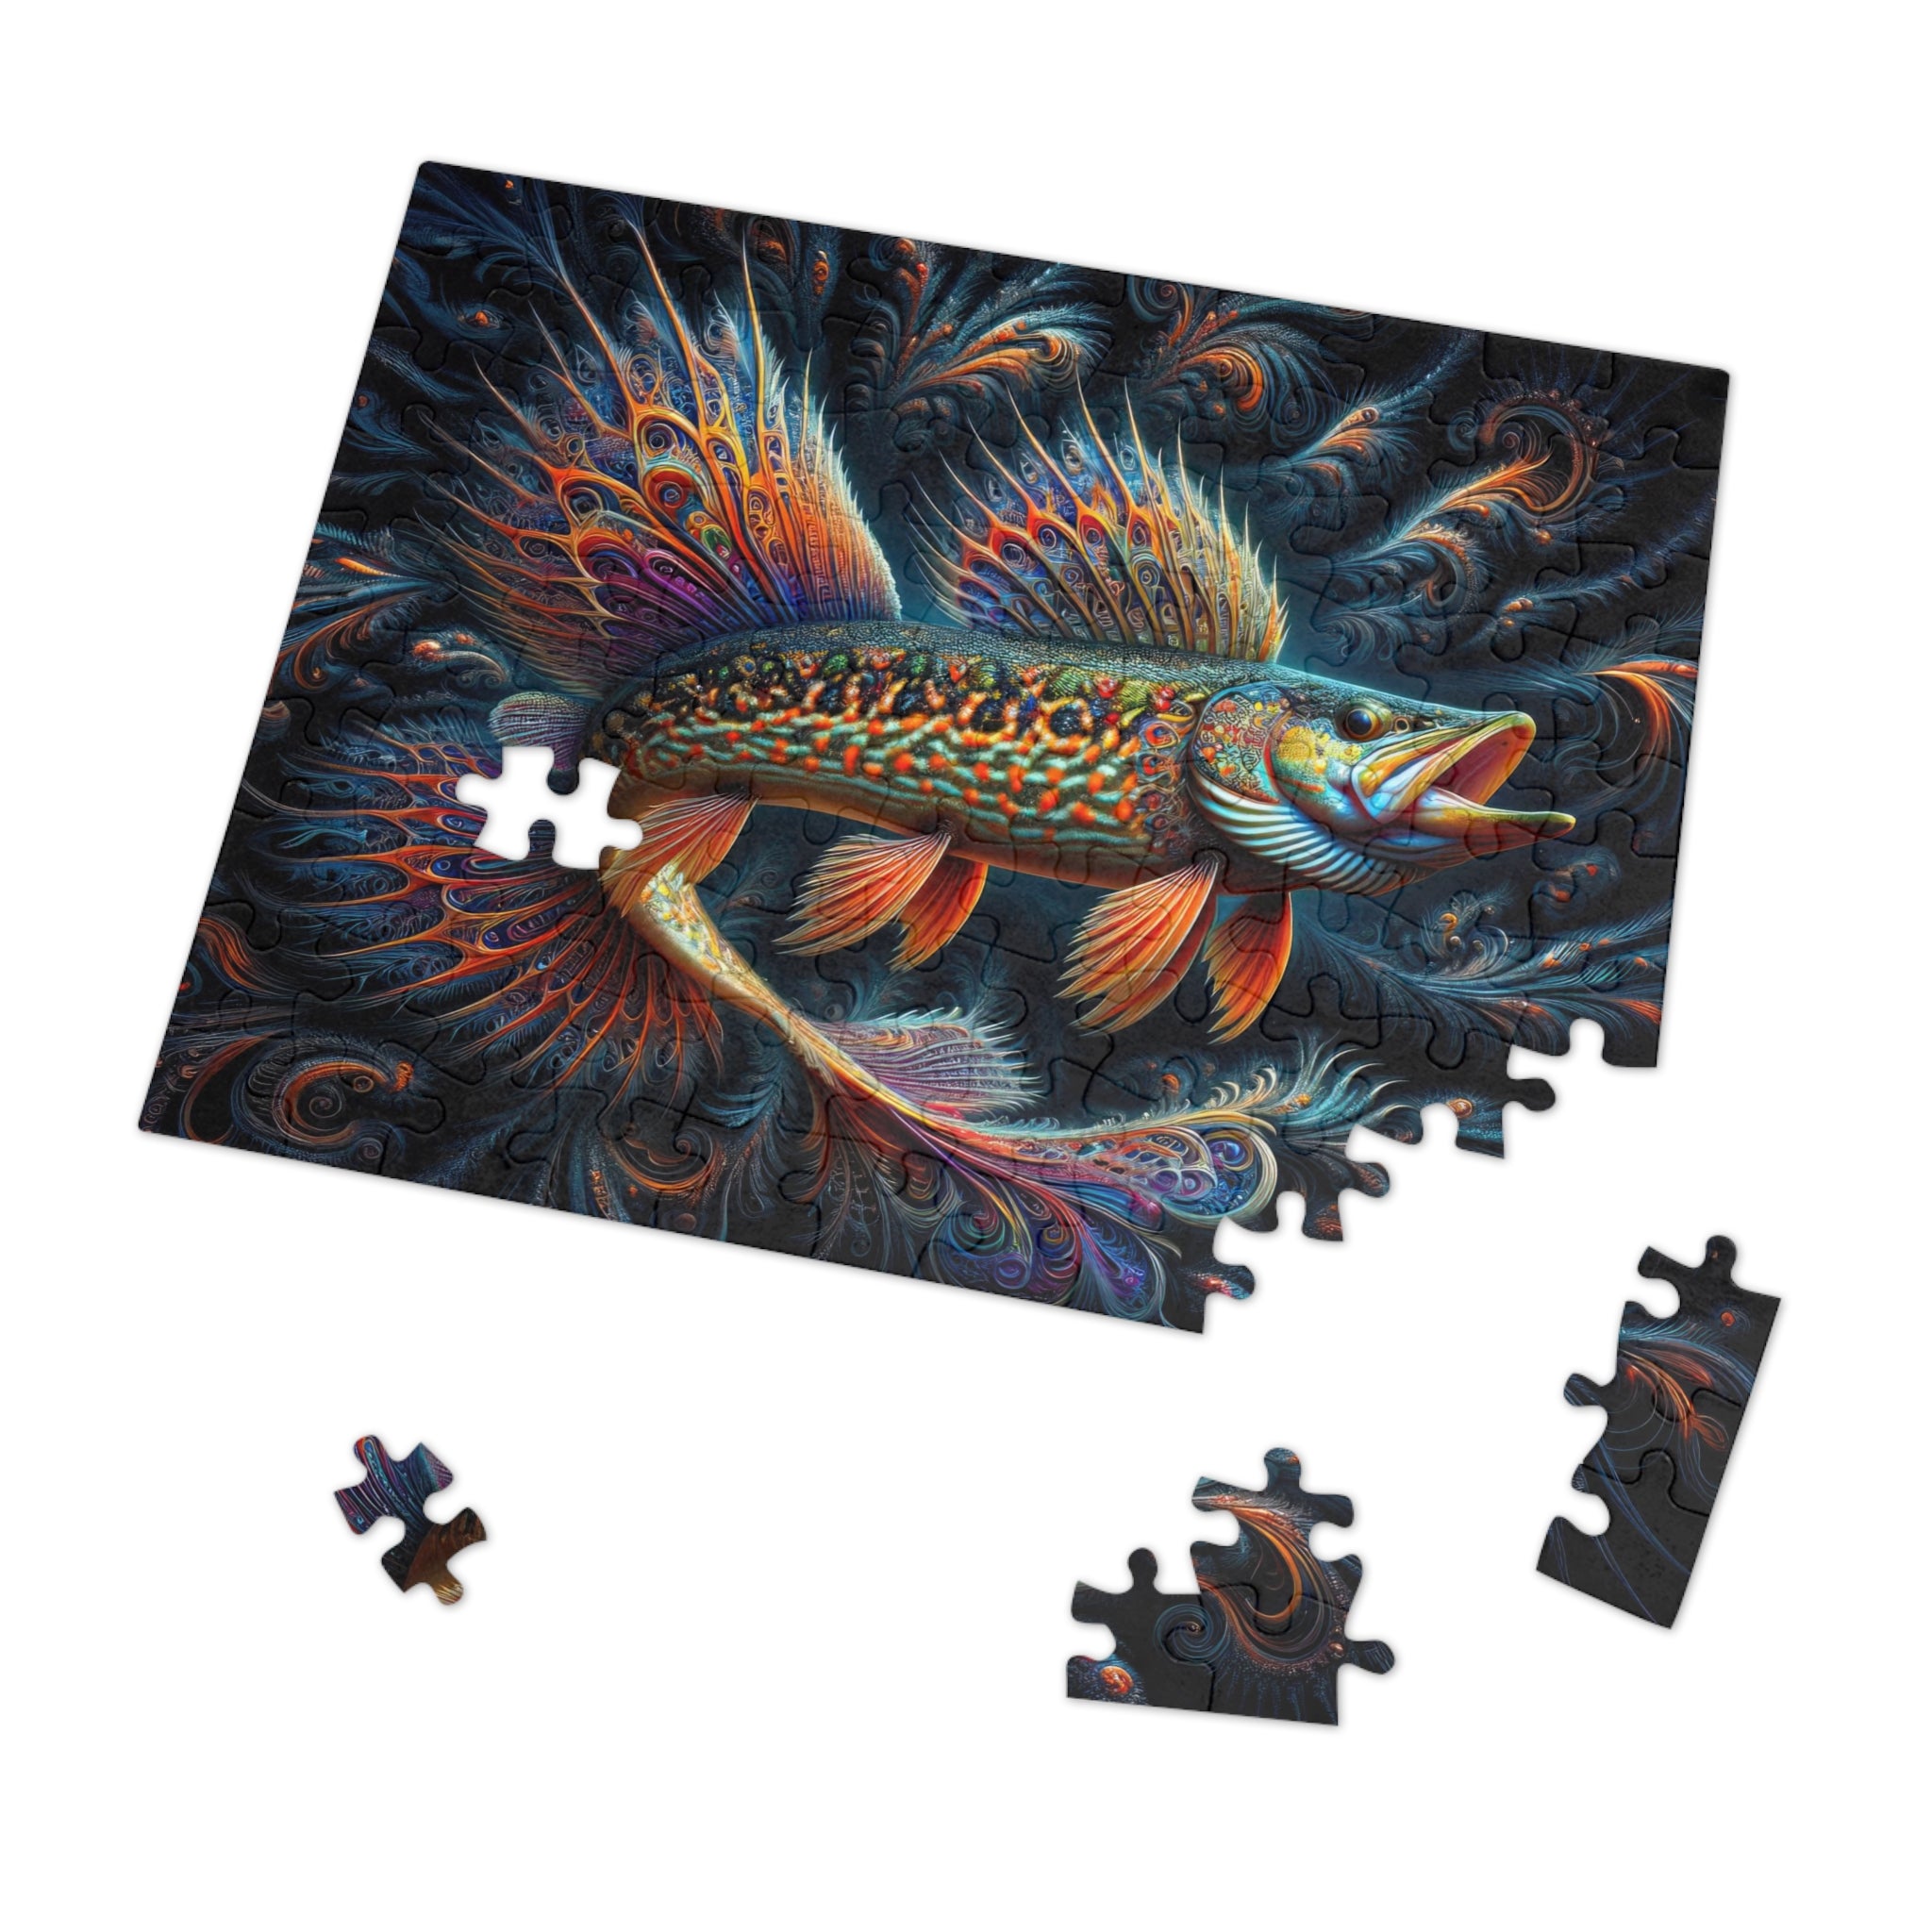 The Mystic Mariner Jigsaw Puzzle